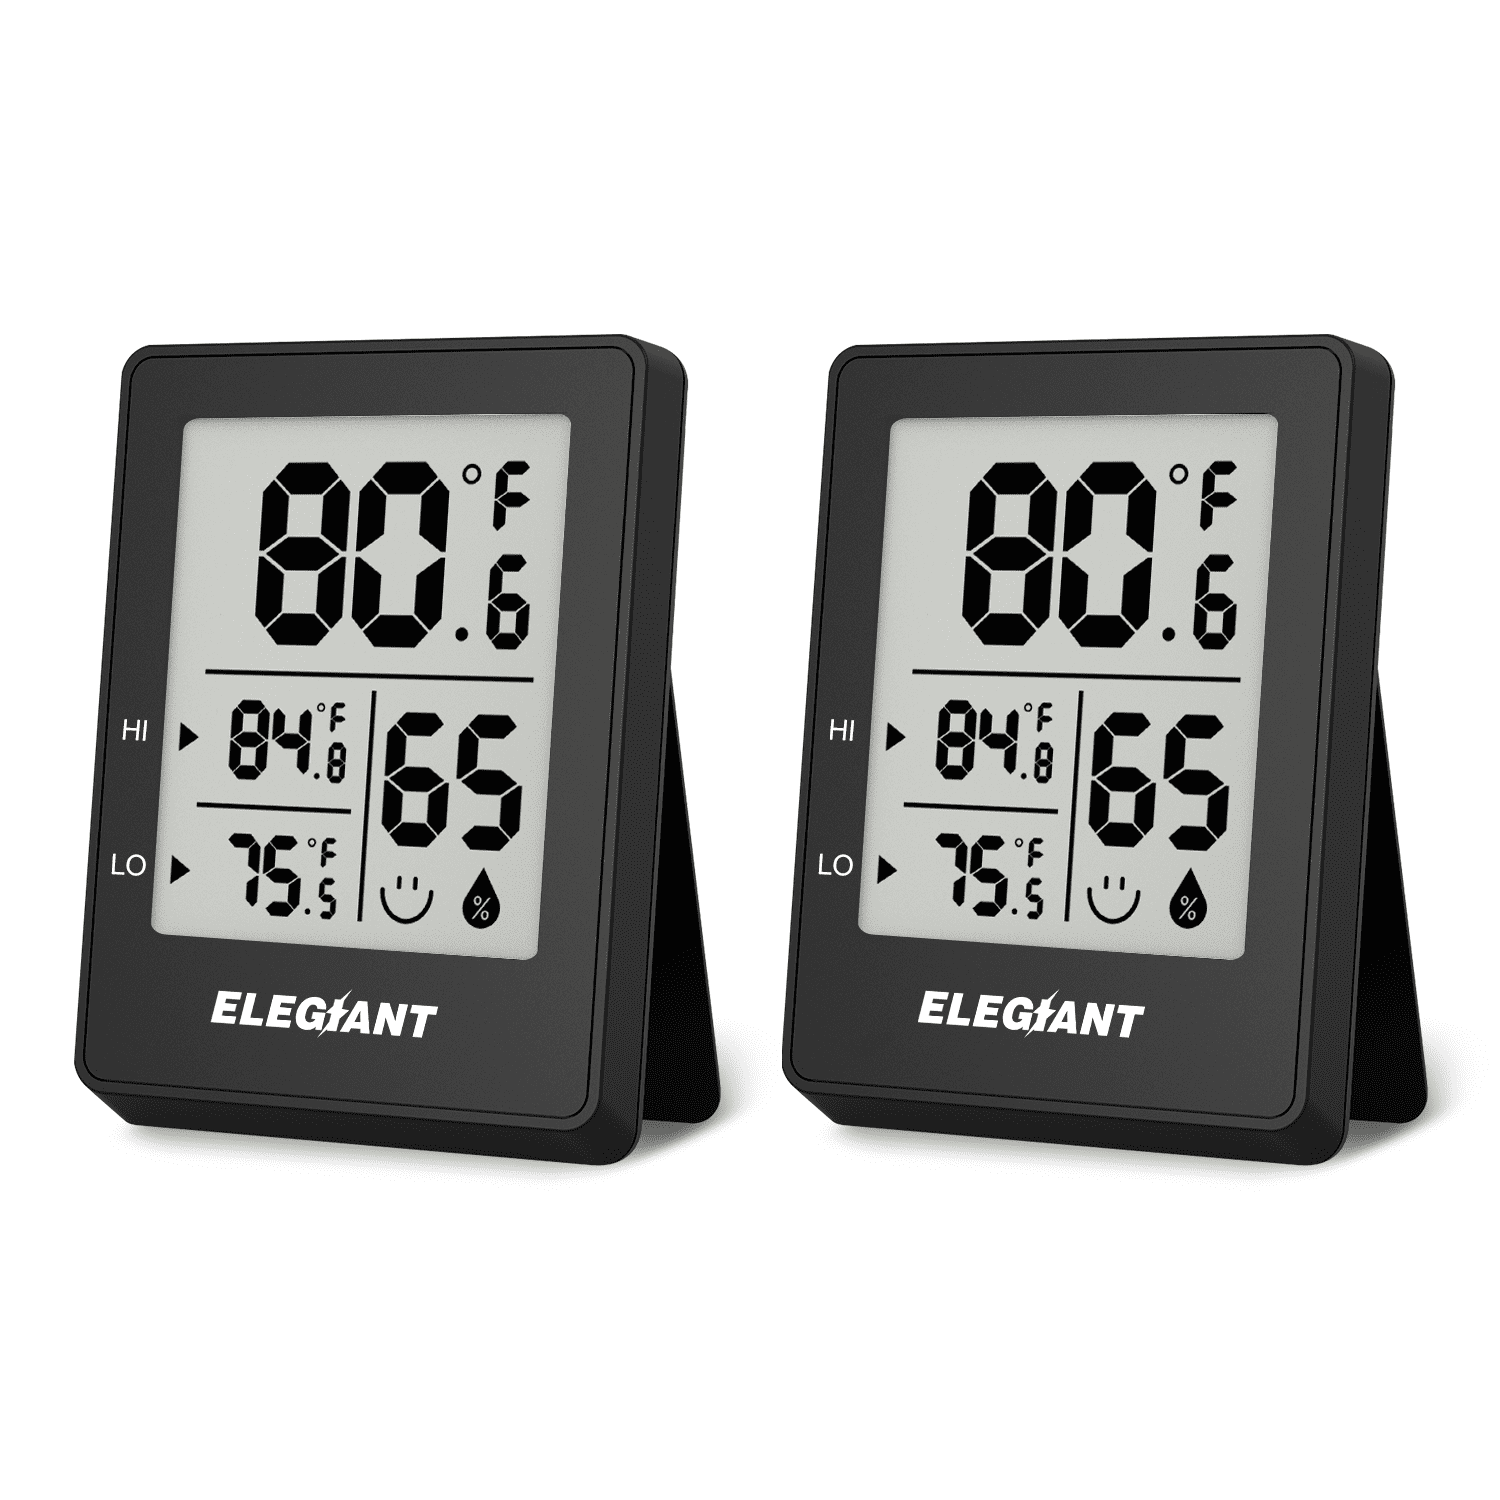 iPower Digital Indoor Hygrometer Thermometer Room Temperature and Humidity Gauge 